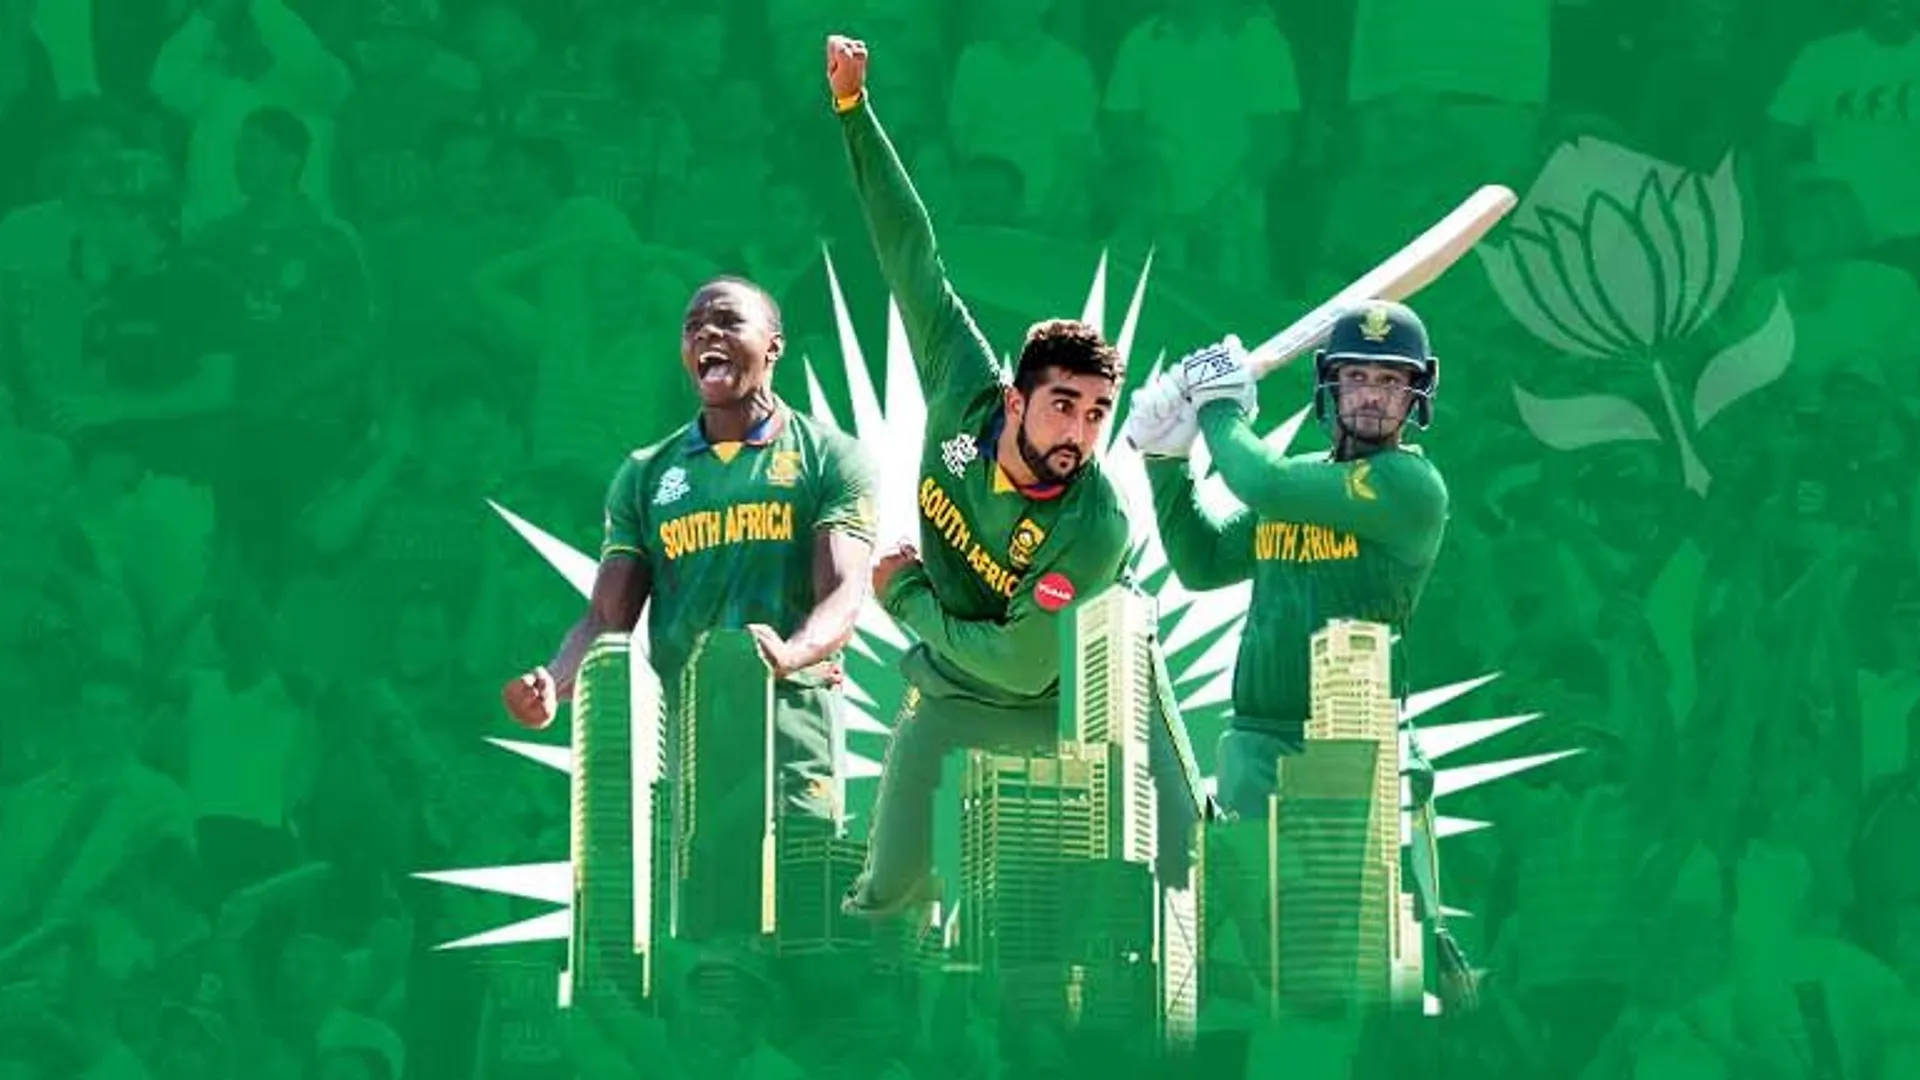 South Africa Cricket Green Poster Background